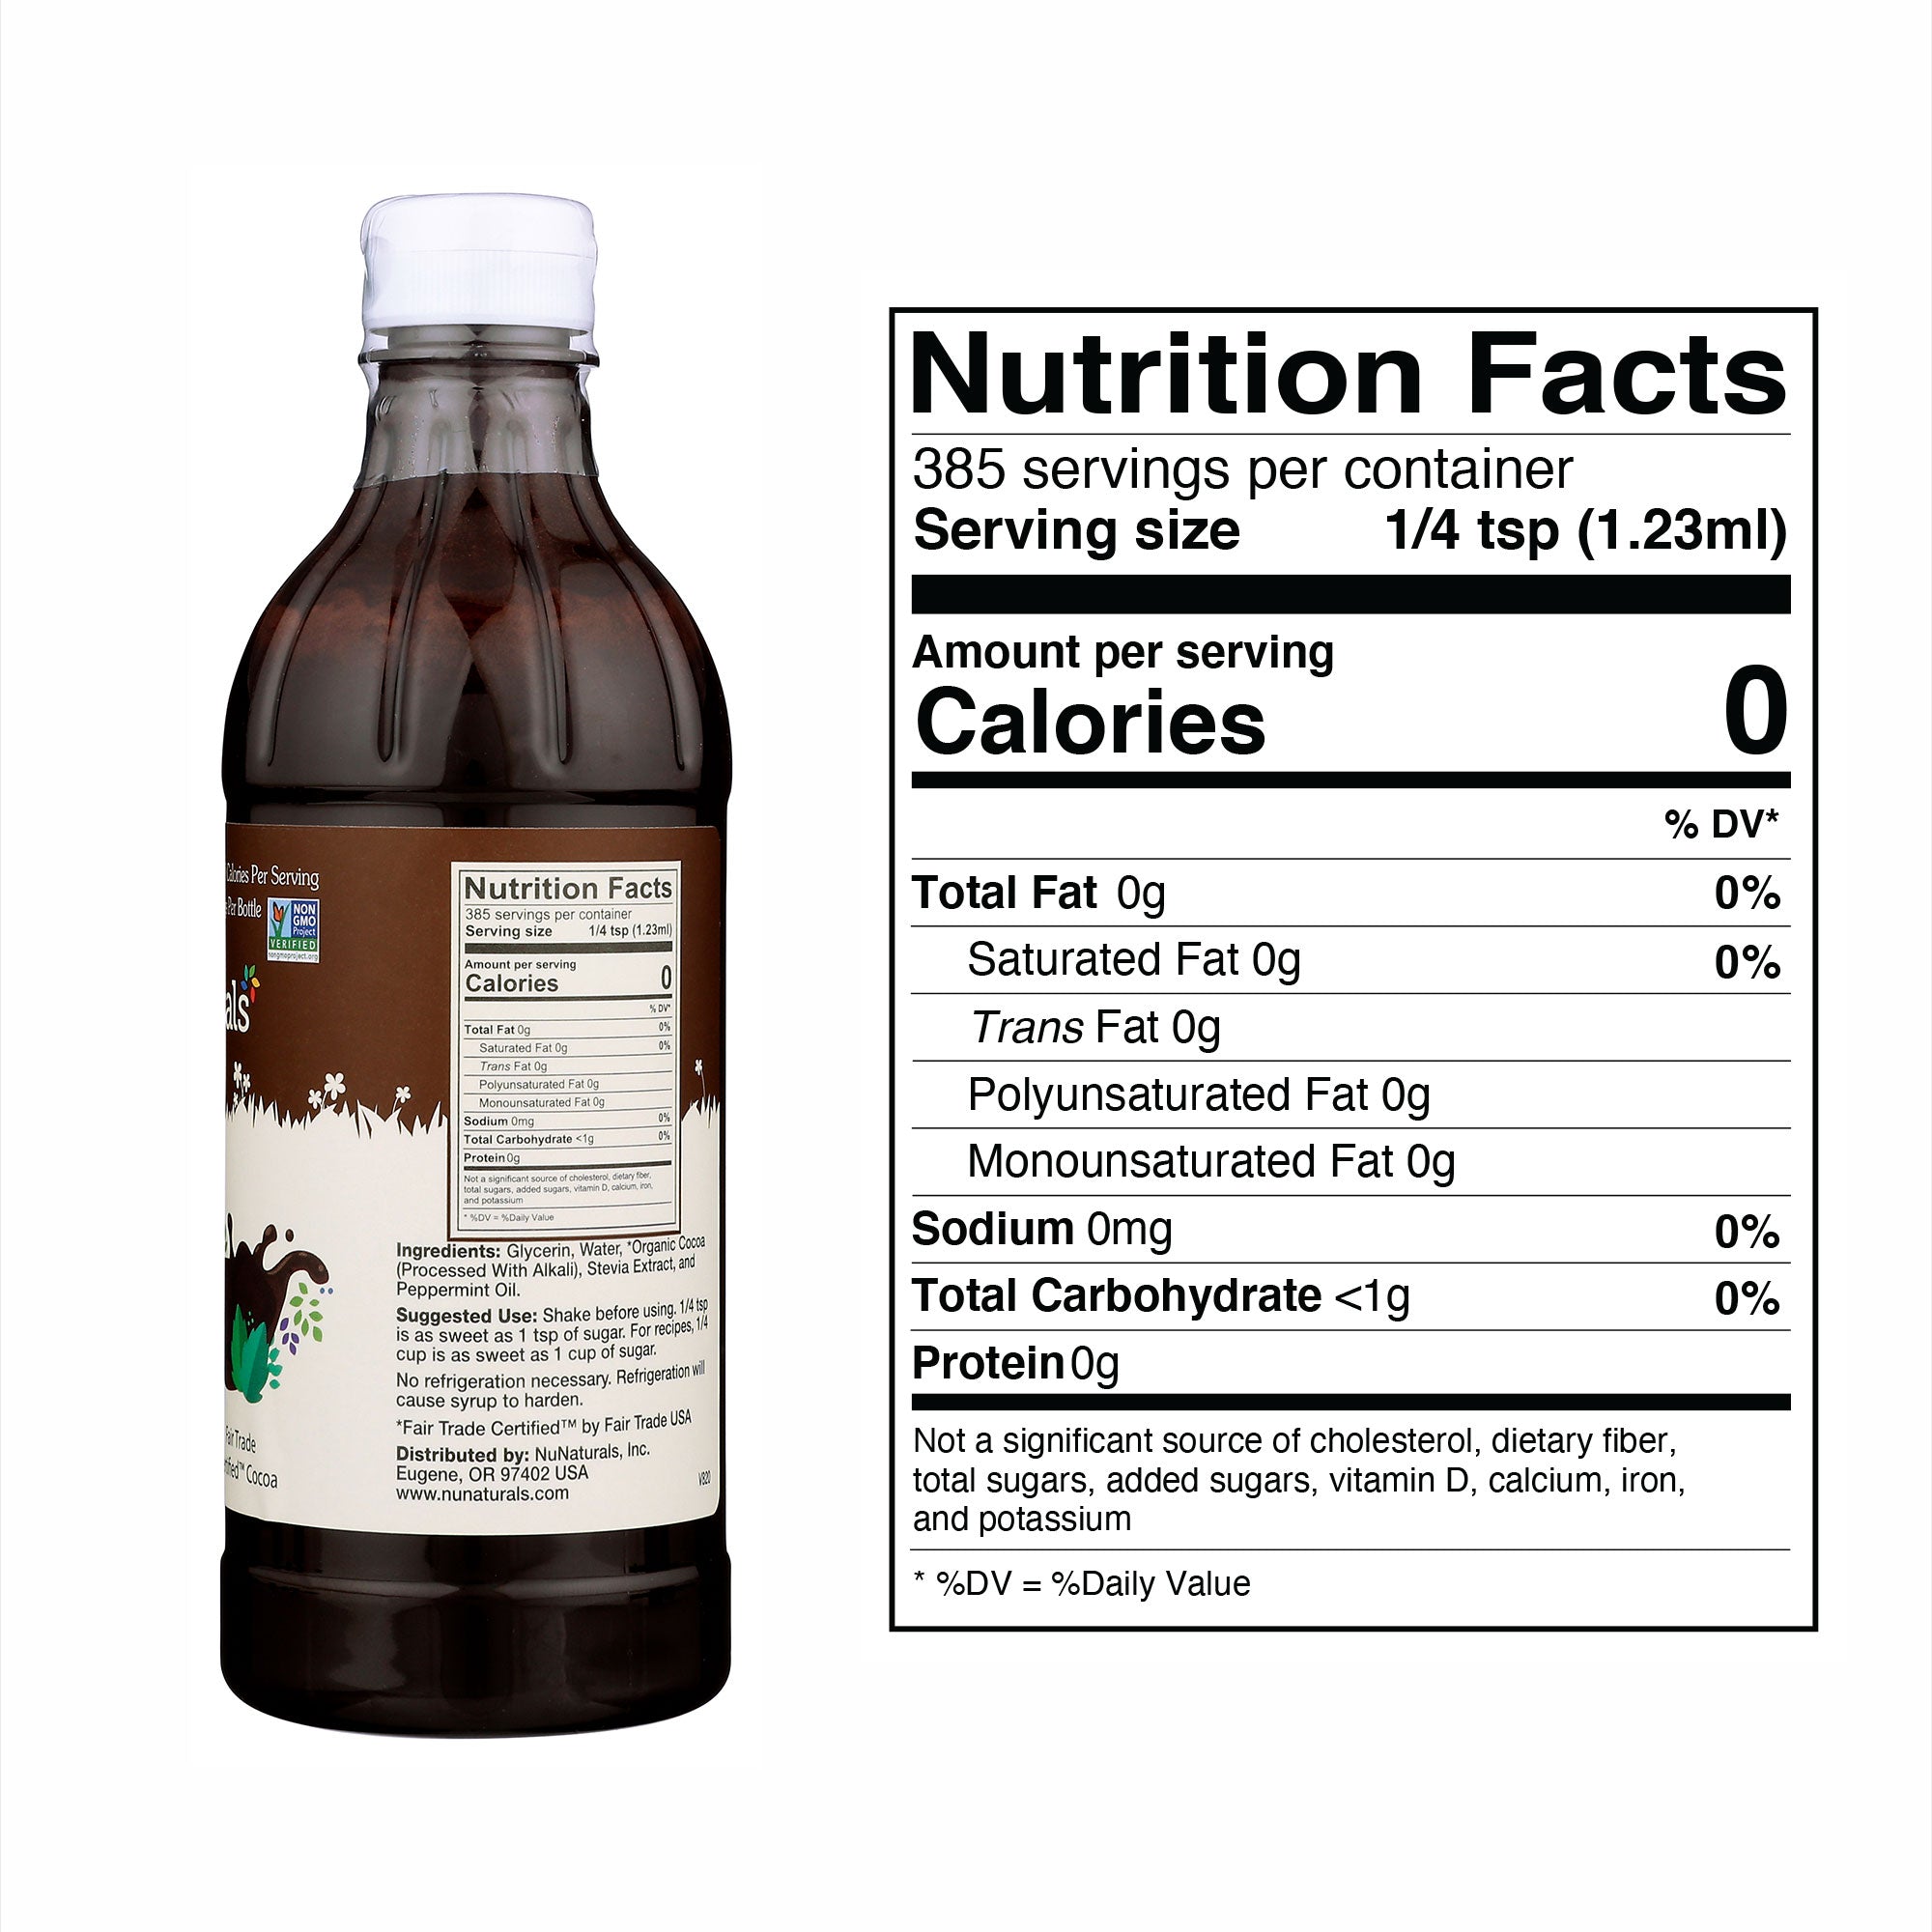 Stevia Cocoa Mint Syrup Nutrition Facts